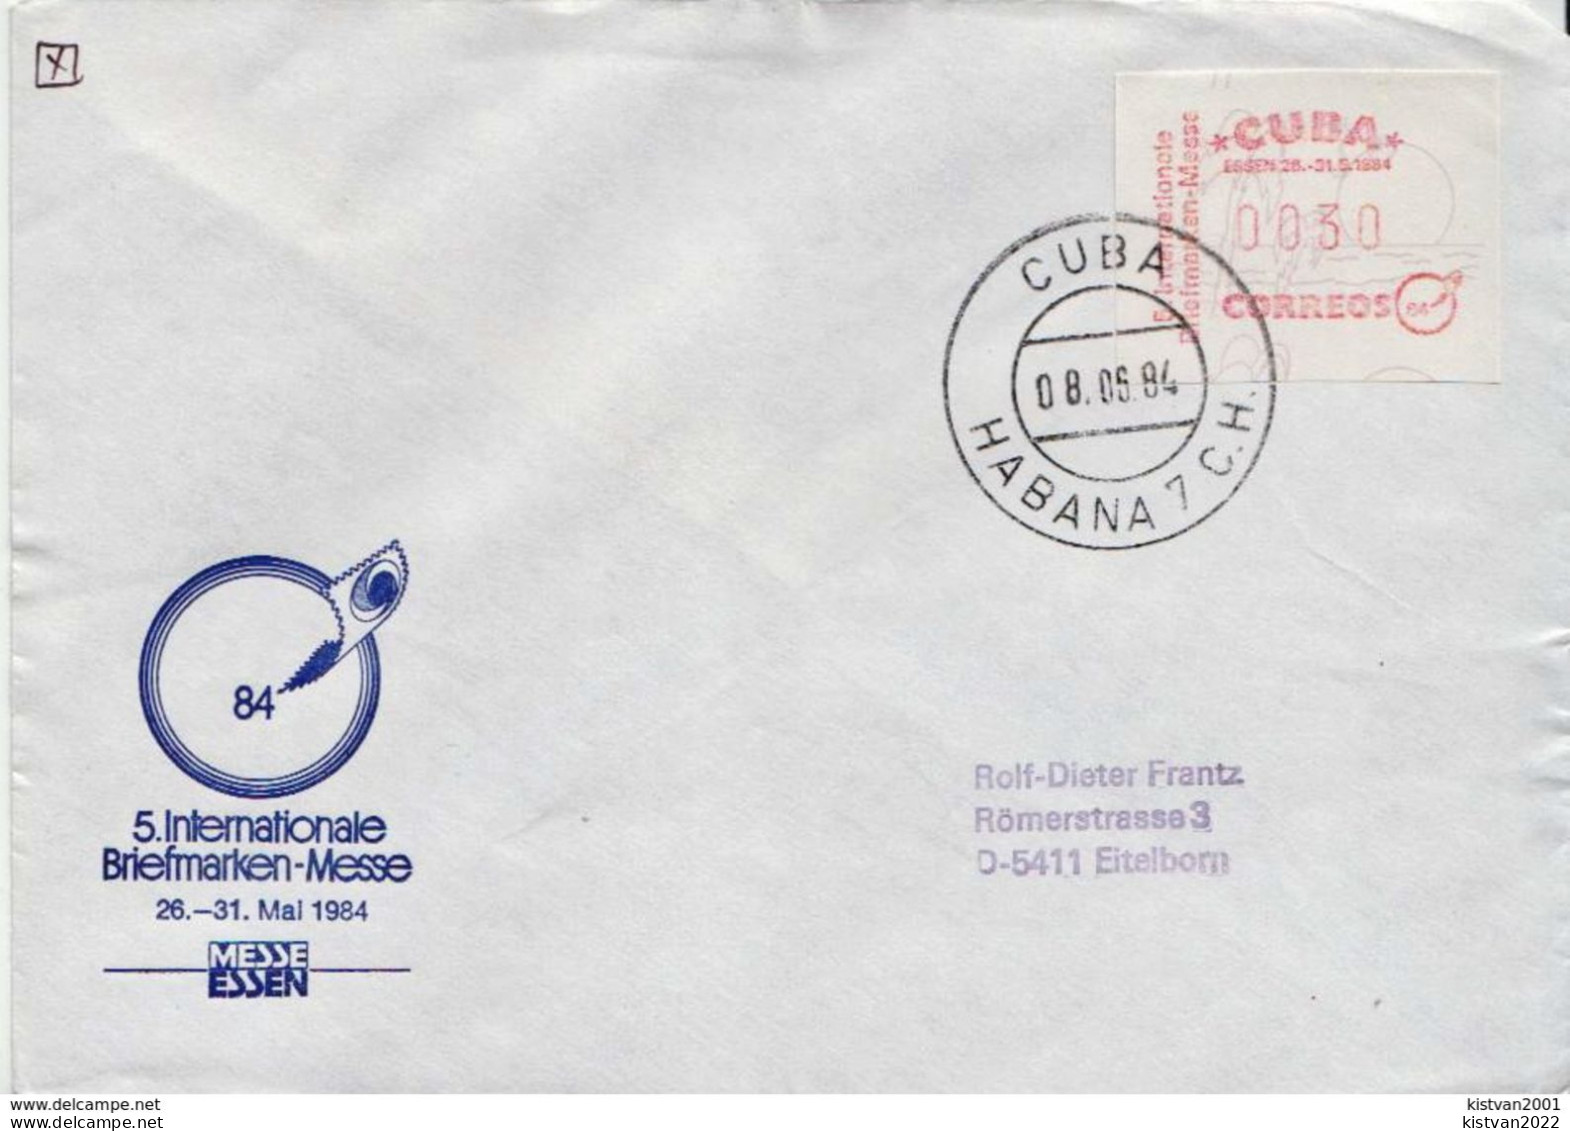 Postal History: Cuba Cover With Machine Stamp - Covers & Documents